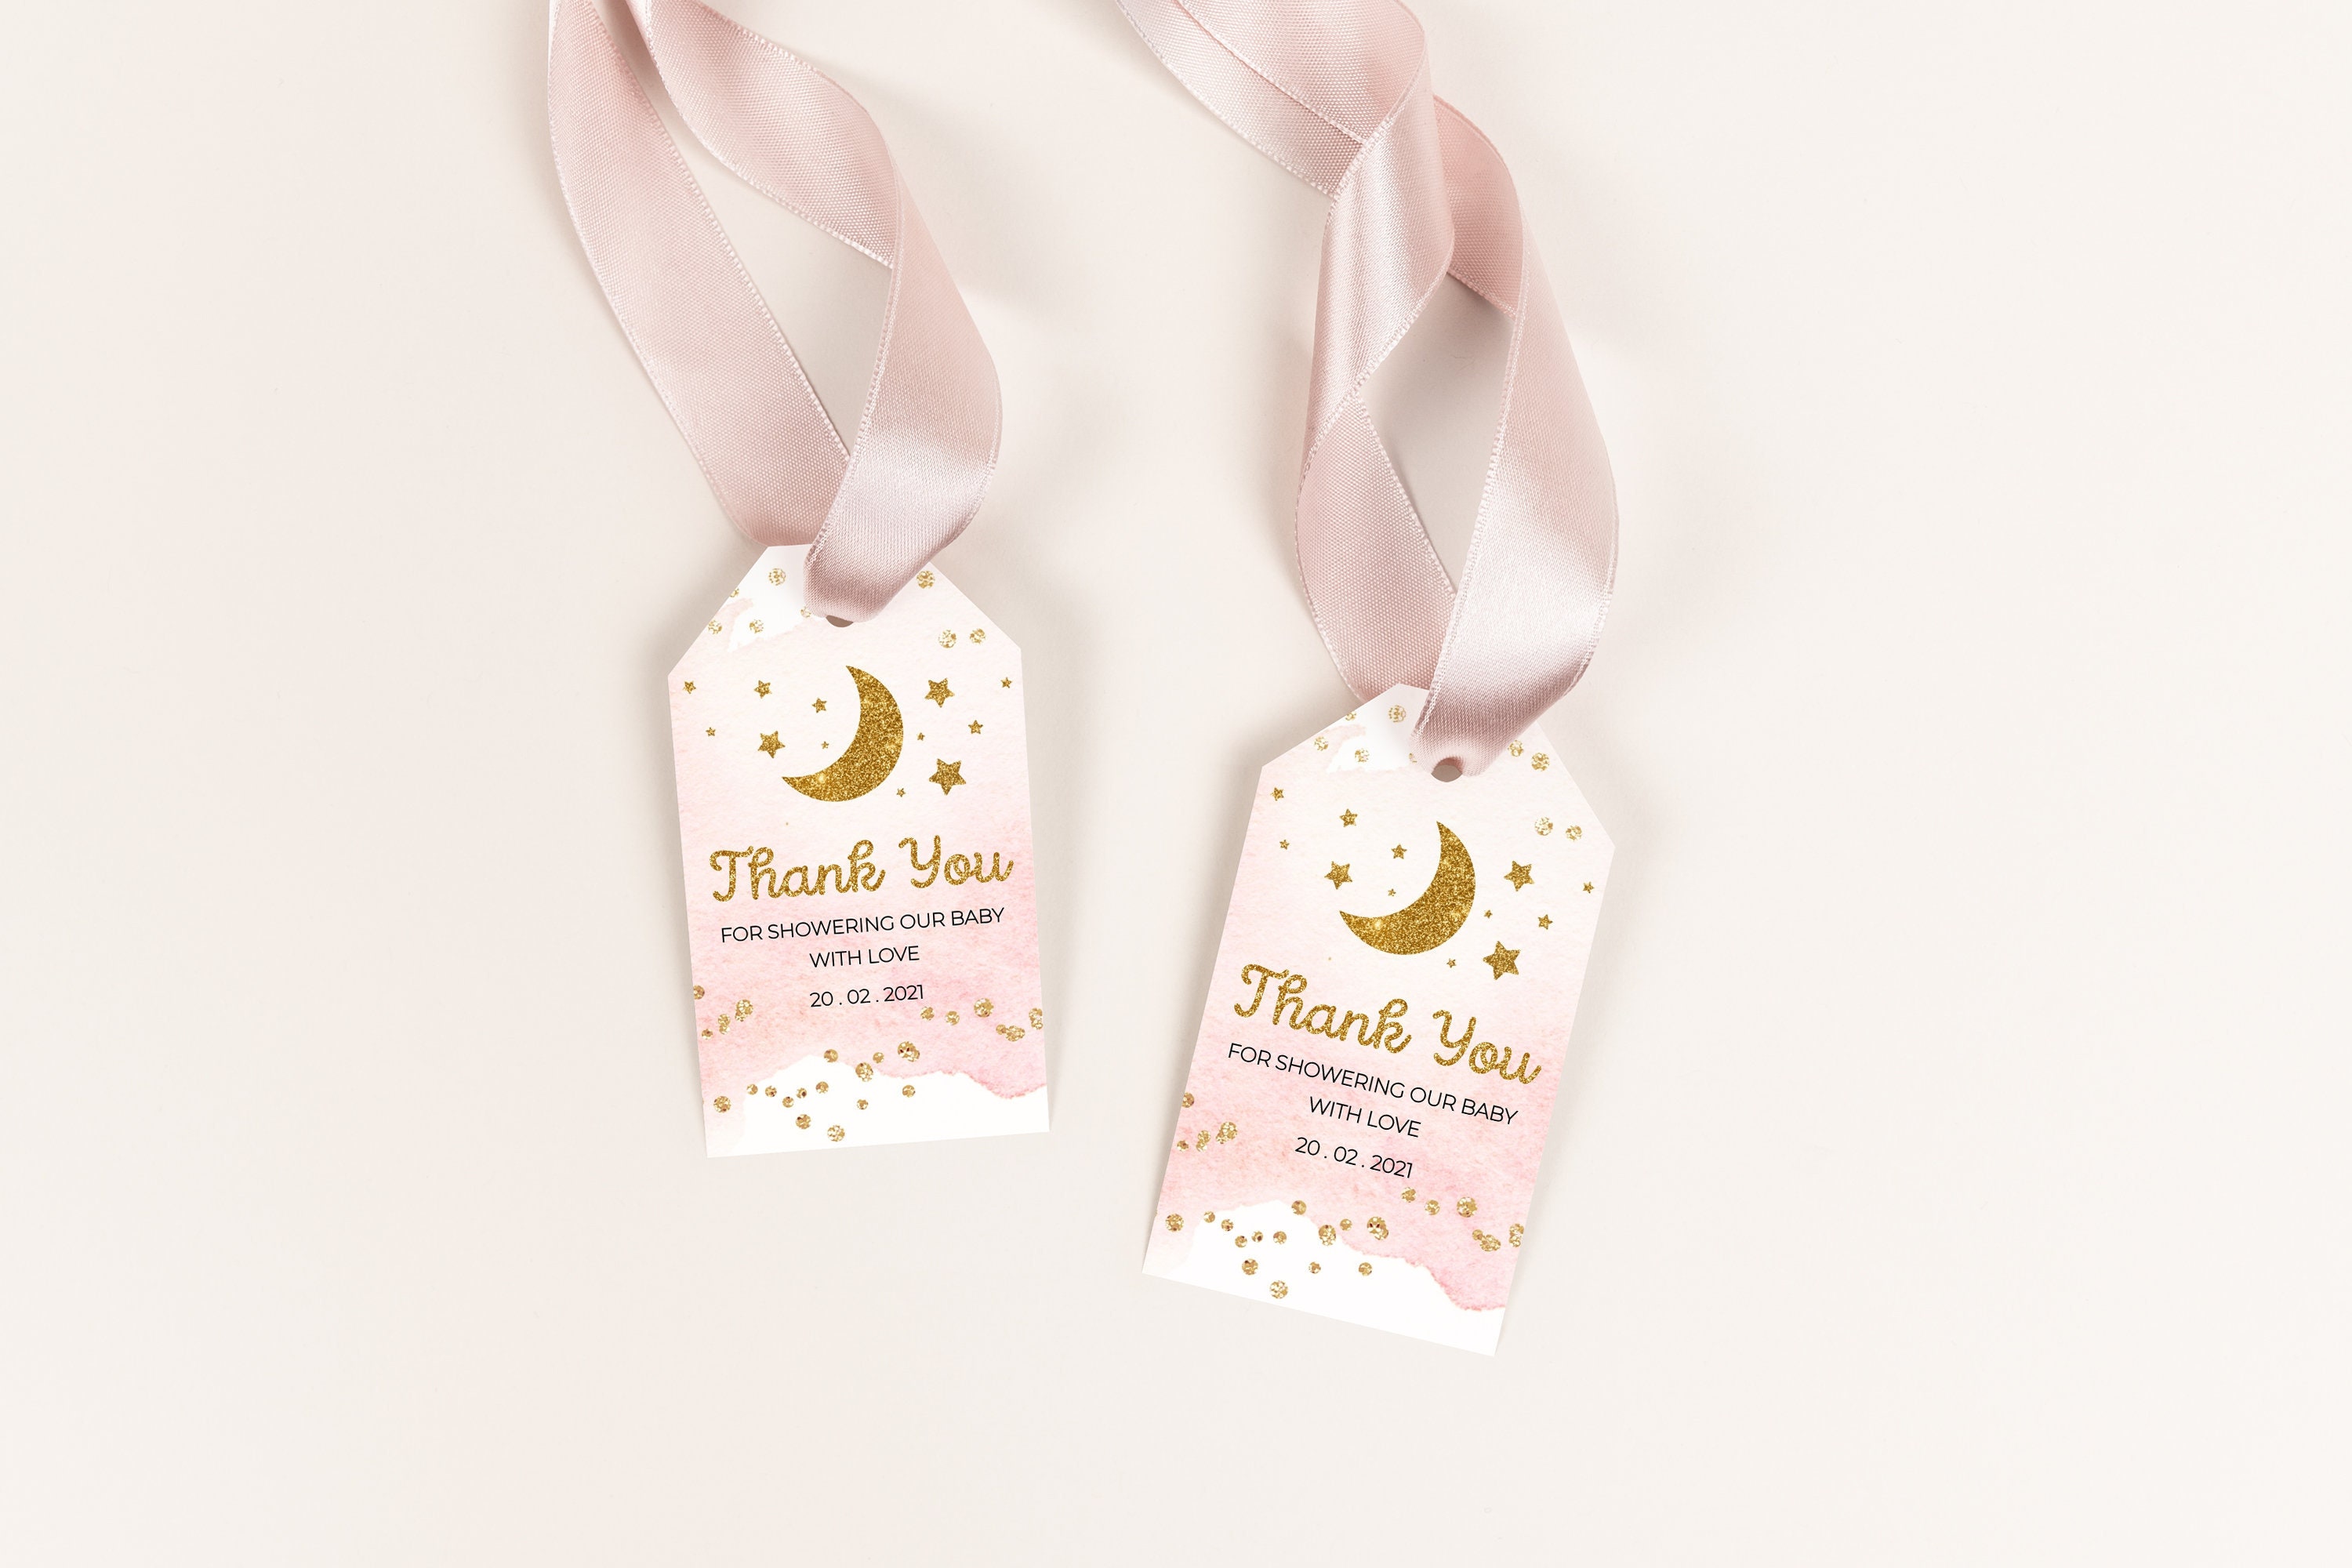 Custom Thank You Tag. PRINTED Baby Shower Tags Personalized Baby Tags Star Tags Baby Shower Favors T03B1 Twinkle Twinkle Little Star